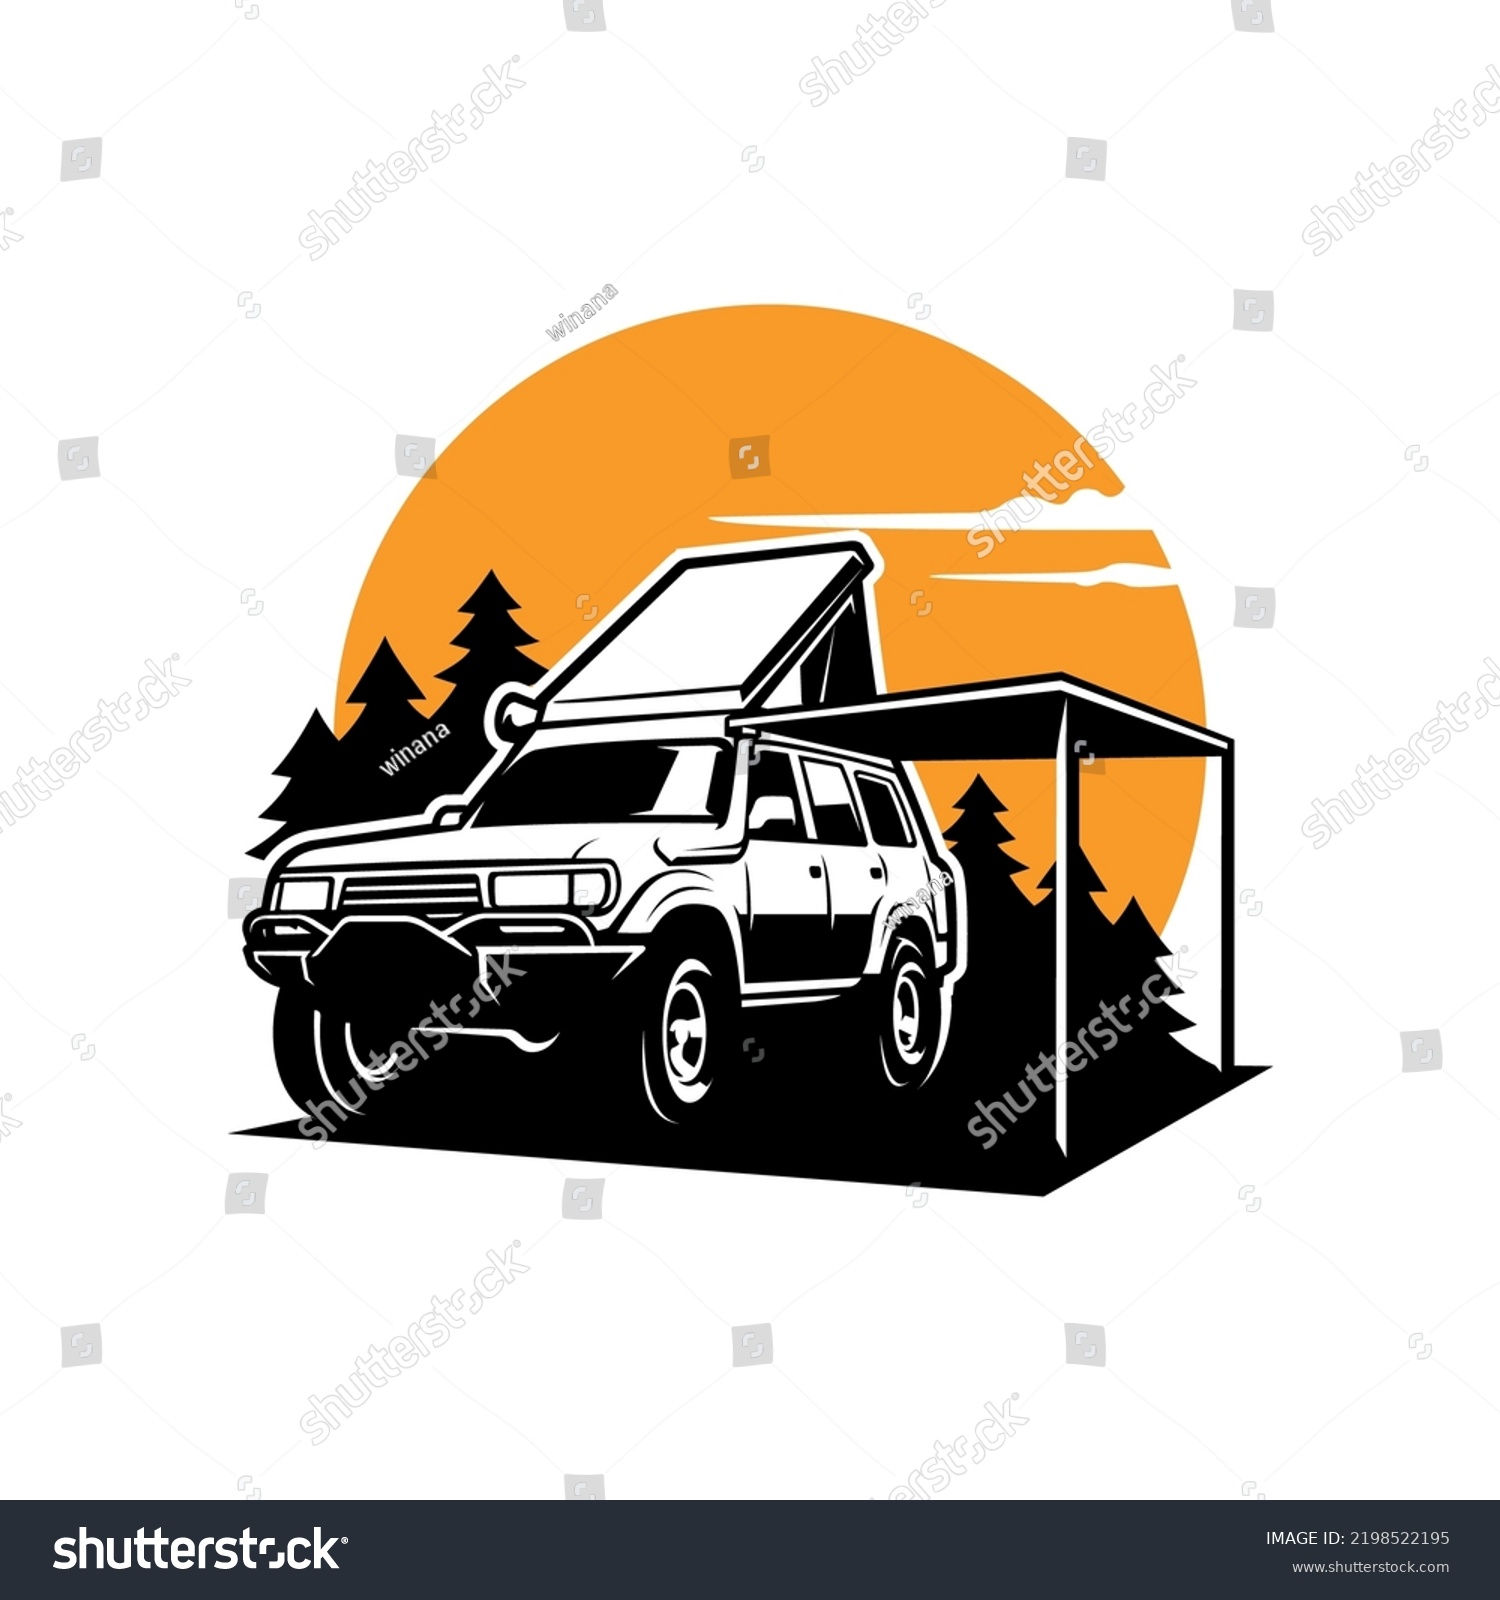 SVG of SUV adventure car with top tent and awning illustration vector svg